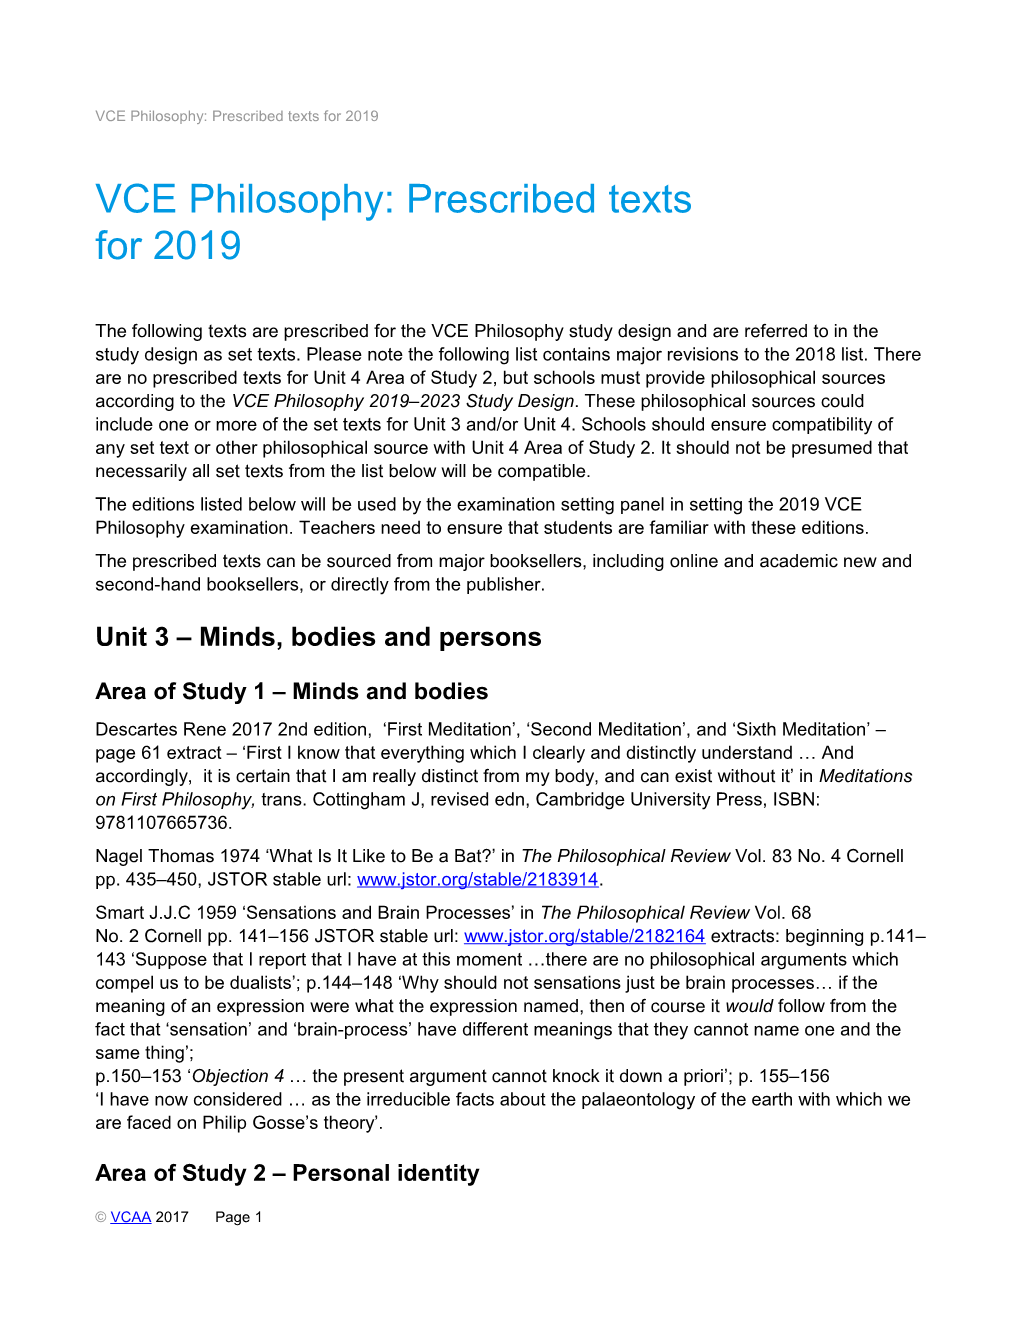 VCE Philosophy: Prescribed Texts for 2019